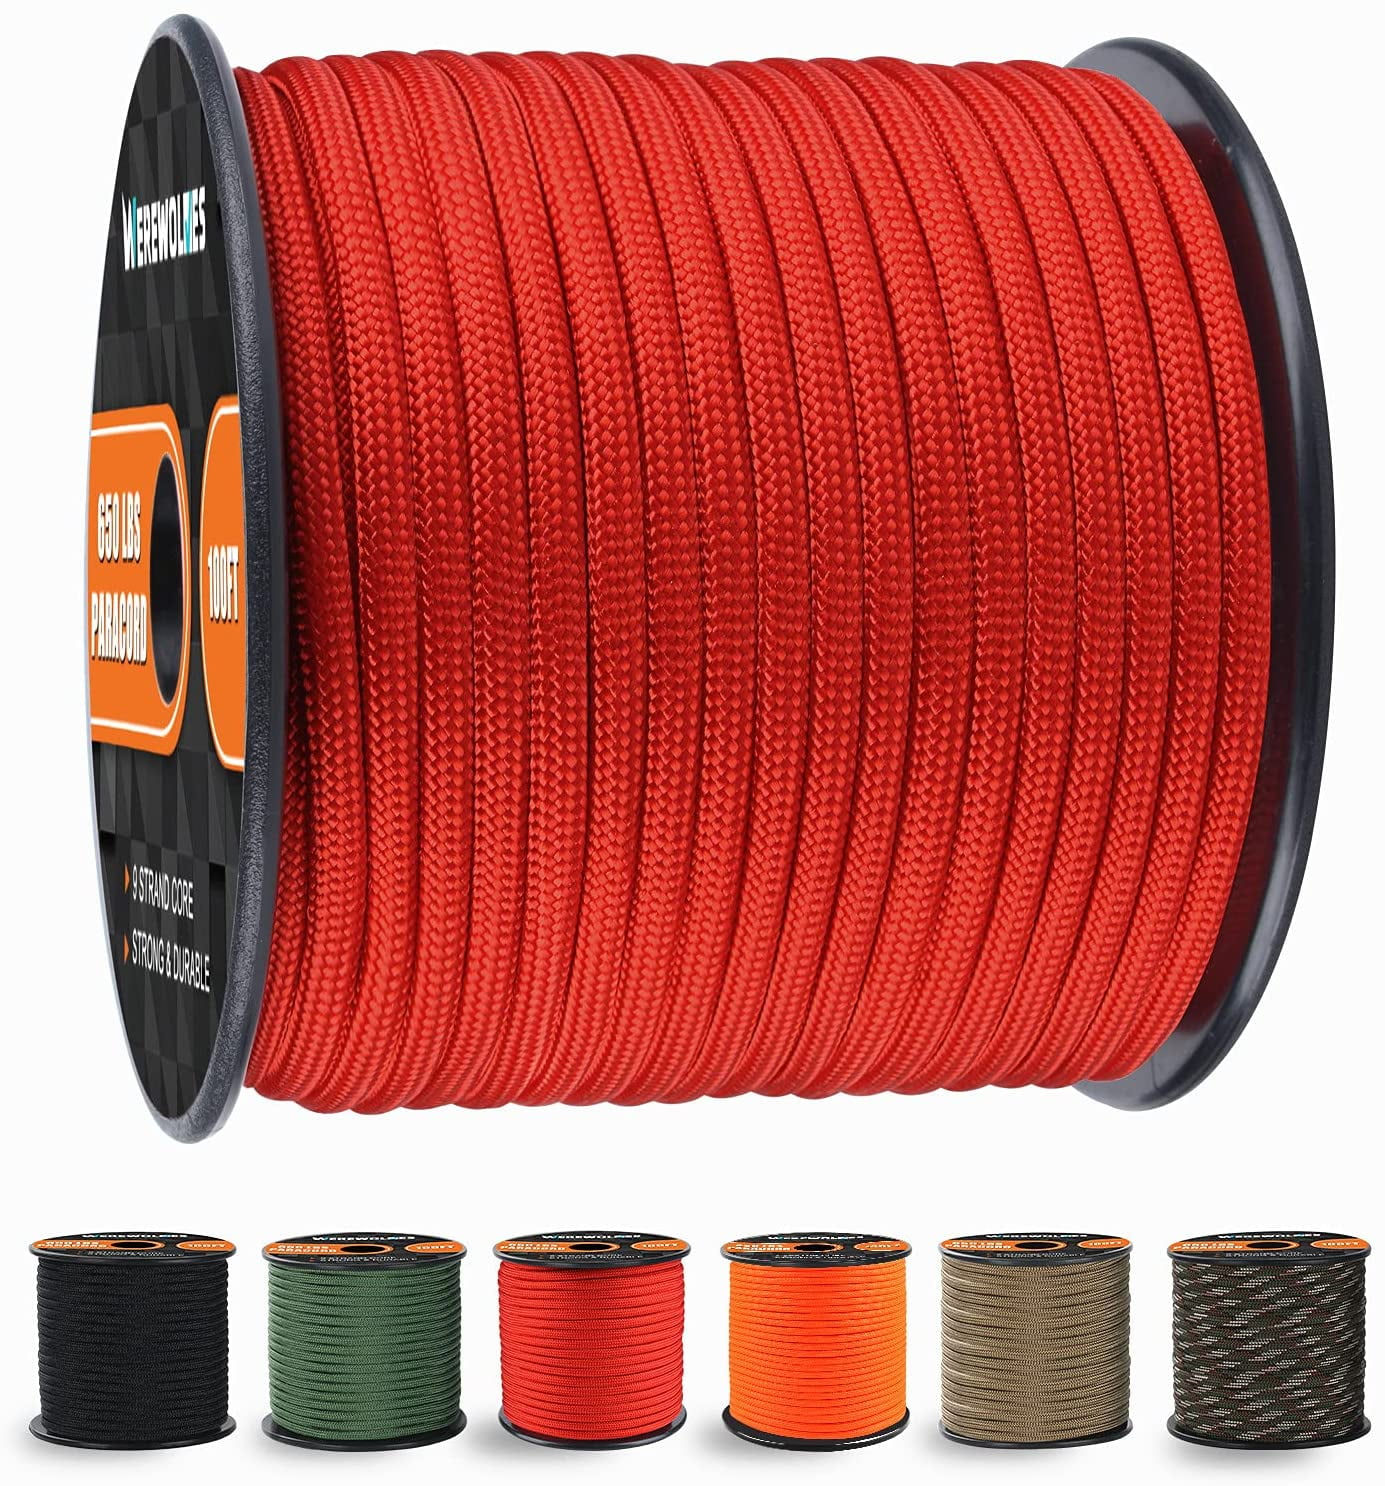 2mm Paracord, Paracord Rope, Umbrella Cord Replacement, 2mm Dia 1 Strand  Core Multi-Function Paracord for Camping Climbing Tying Rope(15m)